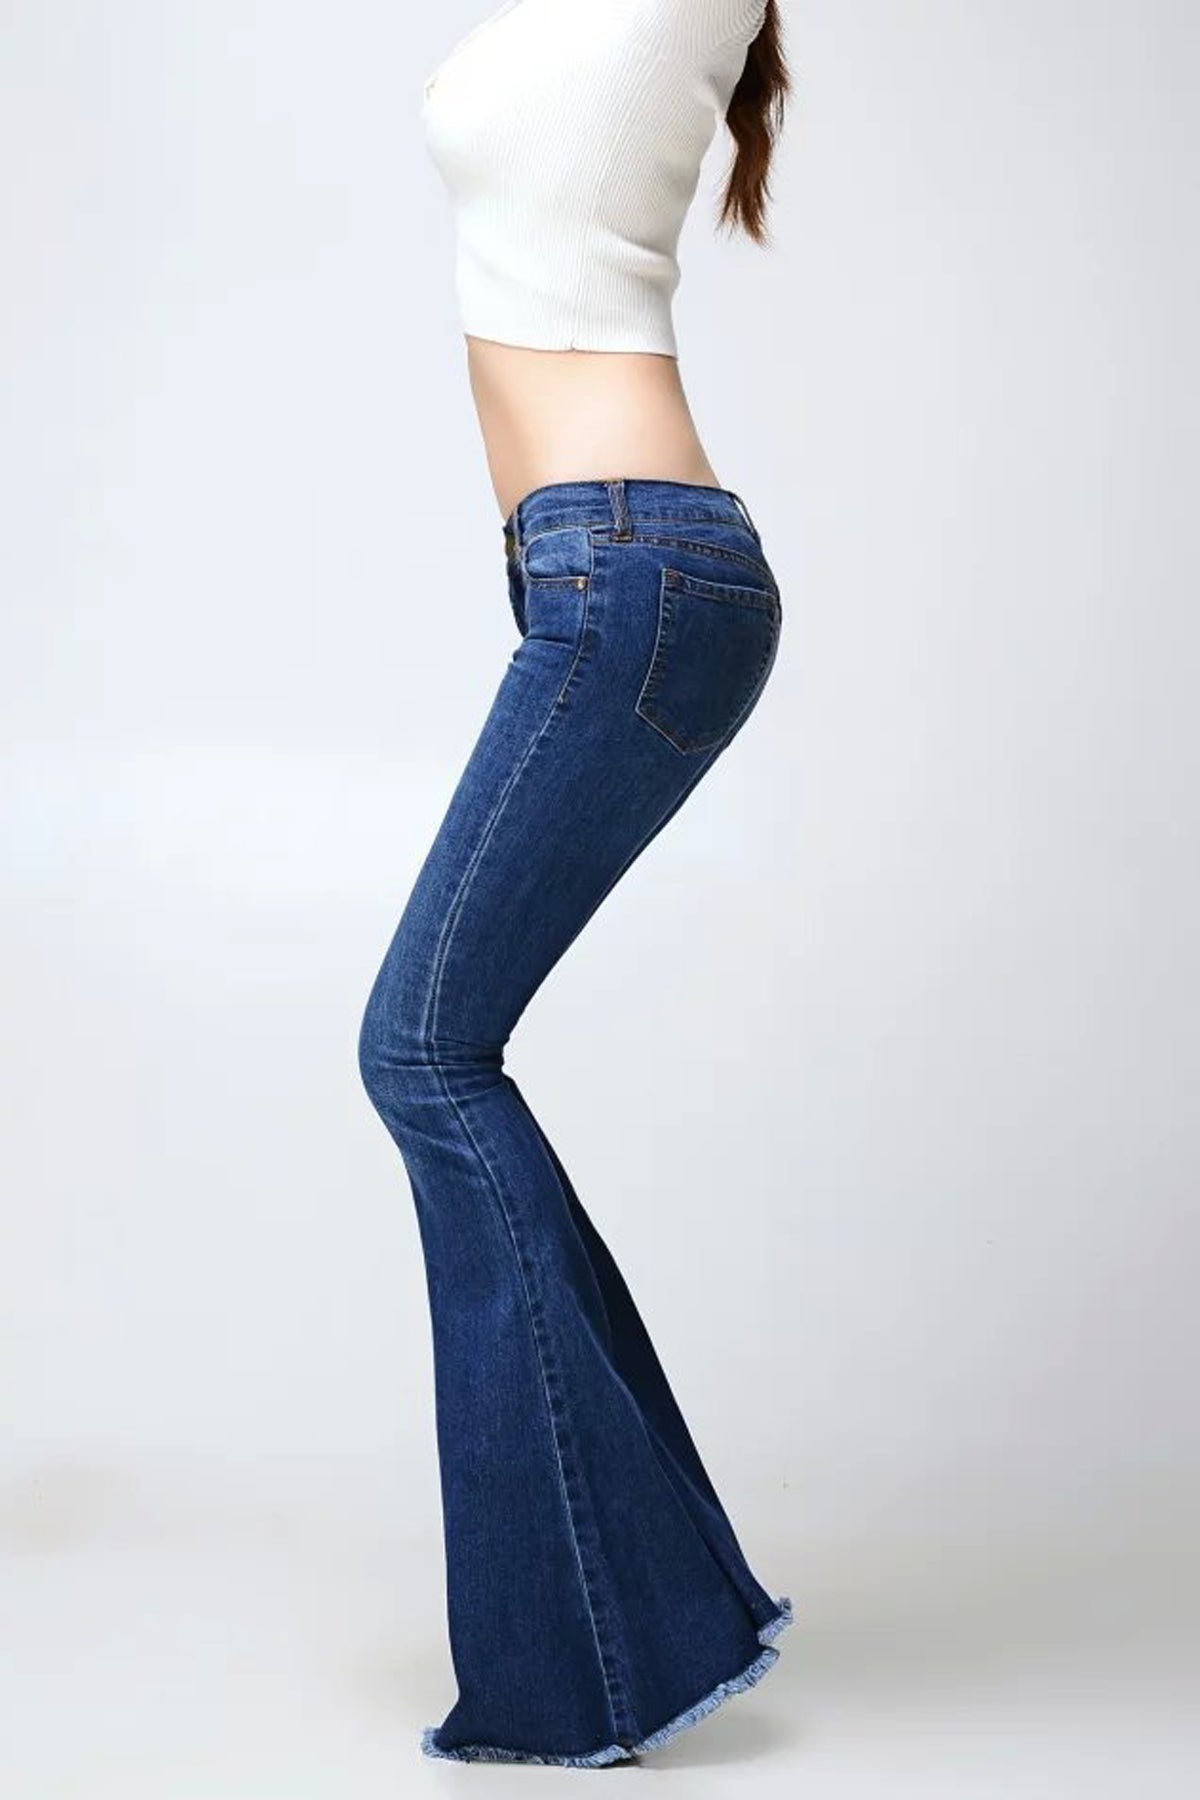 Solid Color Bell-bottomed Middle Waist Long Pants Jeans